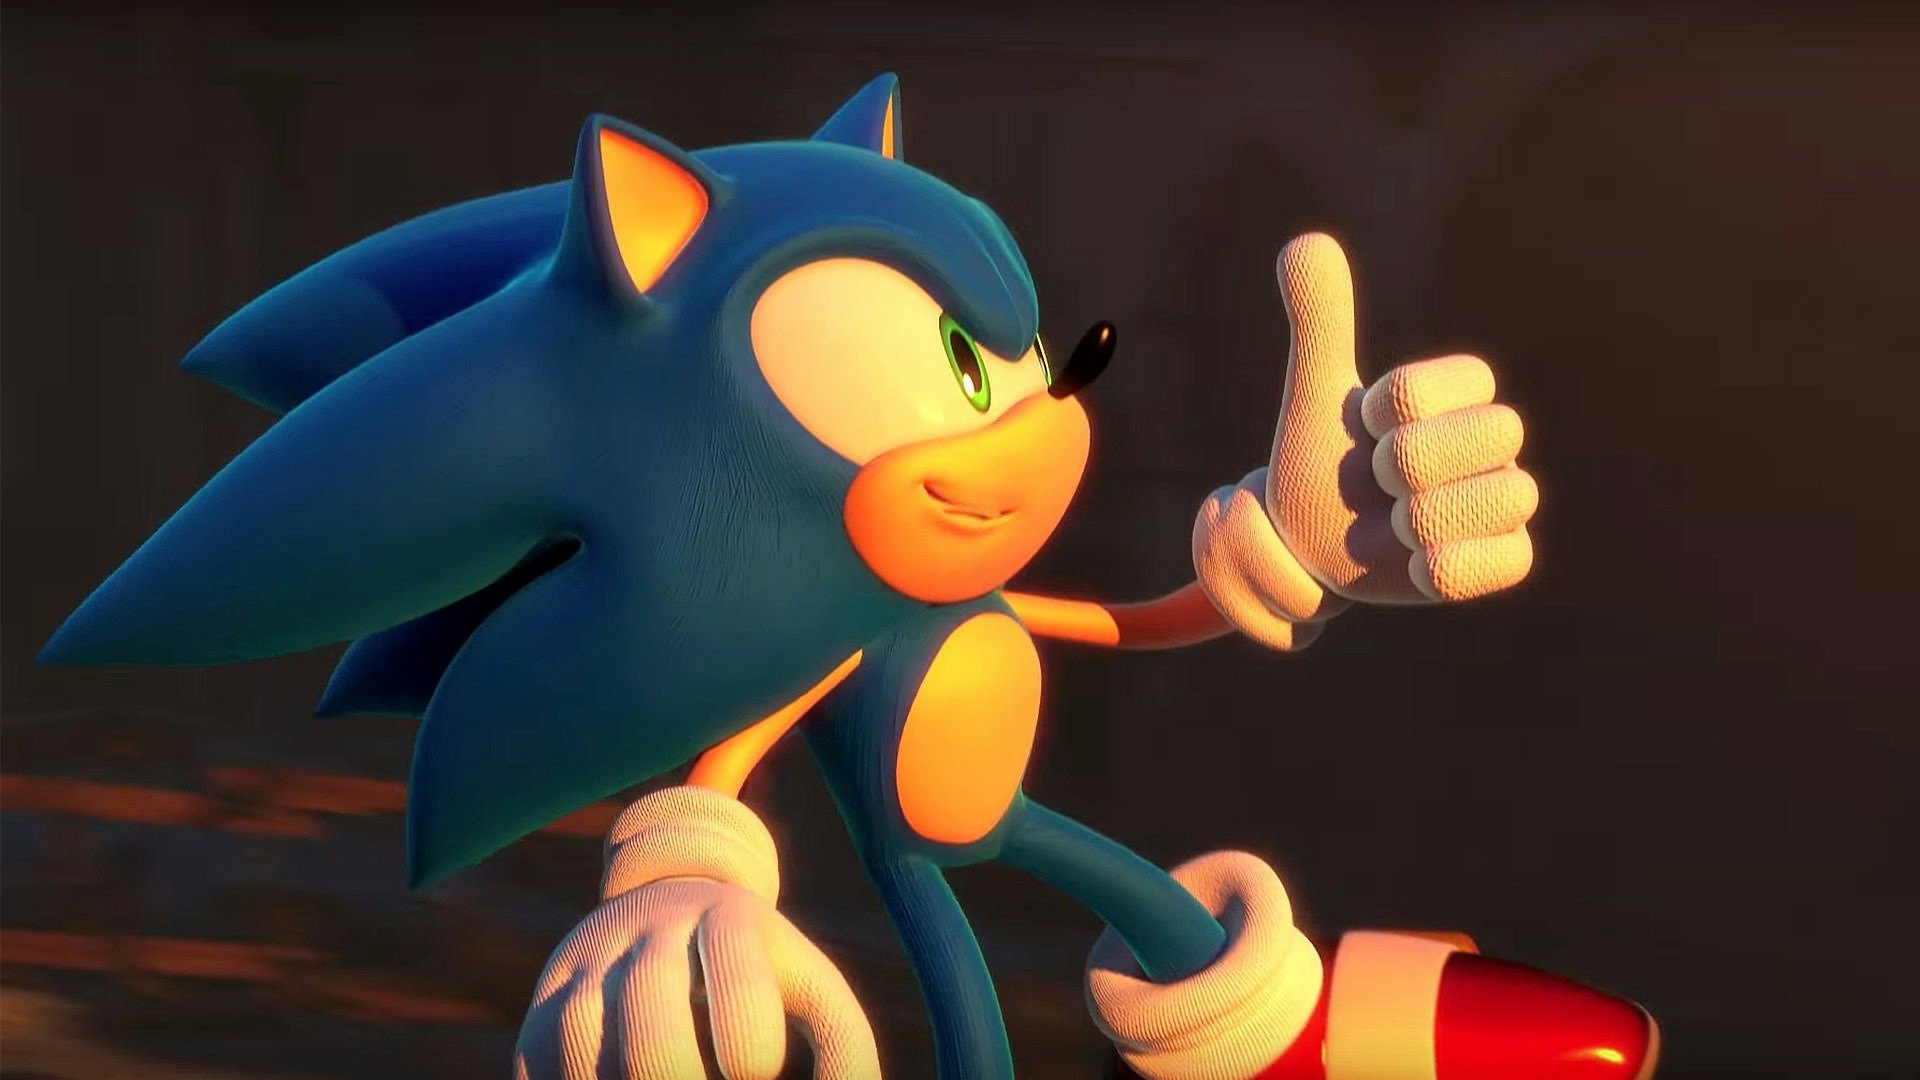 sonic the hedgehog 1 release date